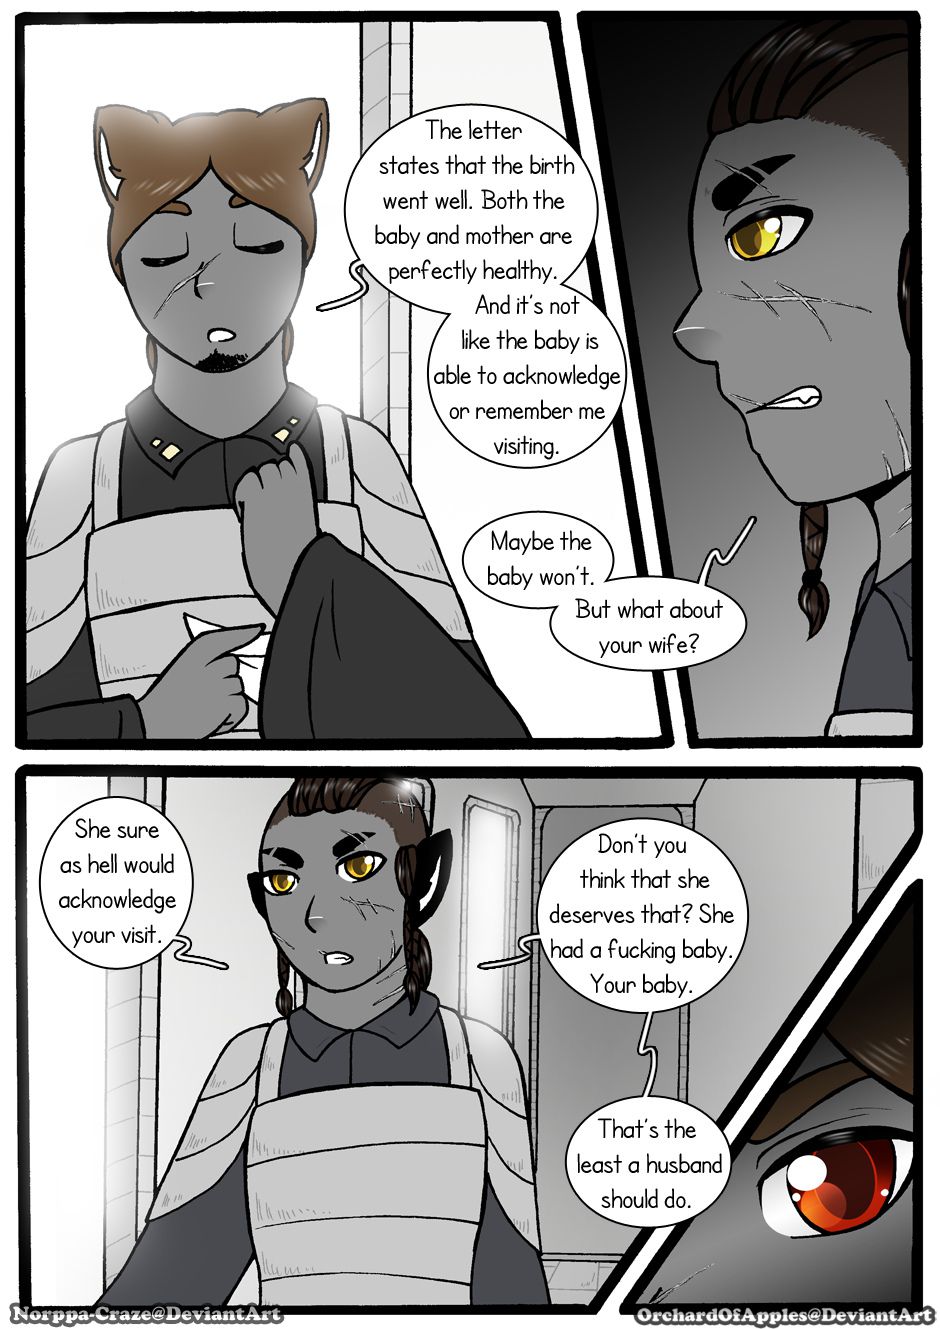 [Jeny-jen94] Between Kings and Queens [Ongoing] 297